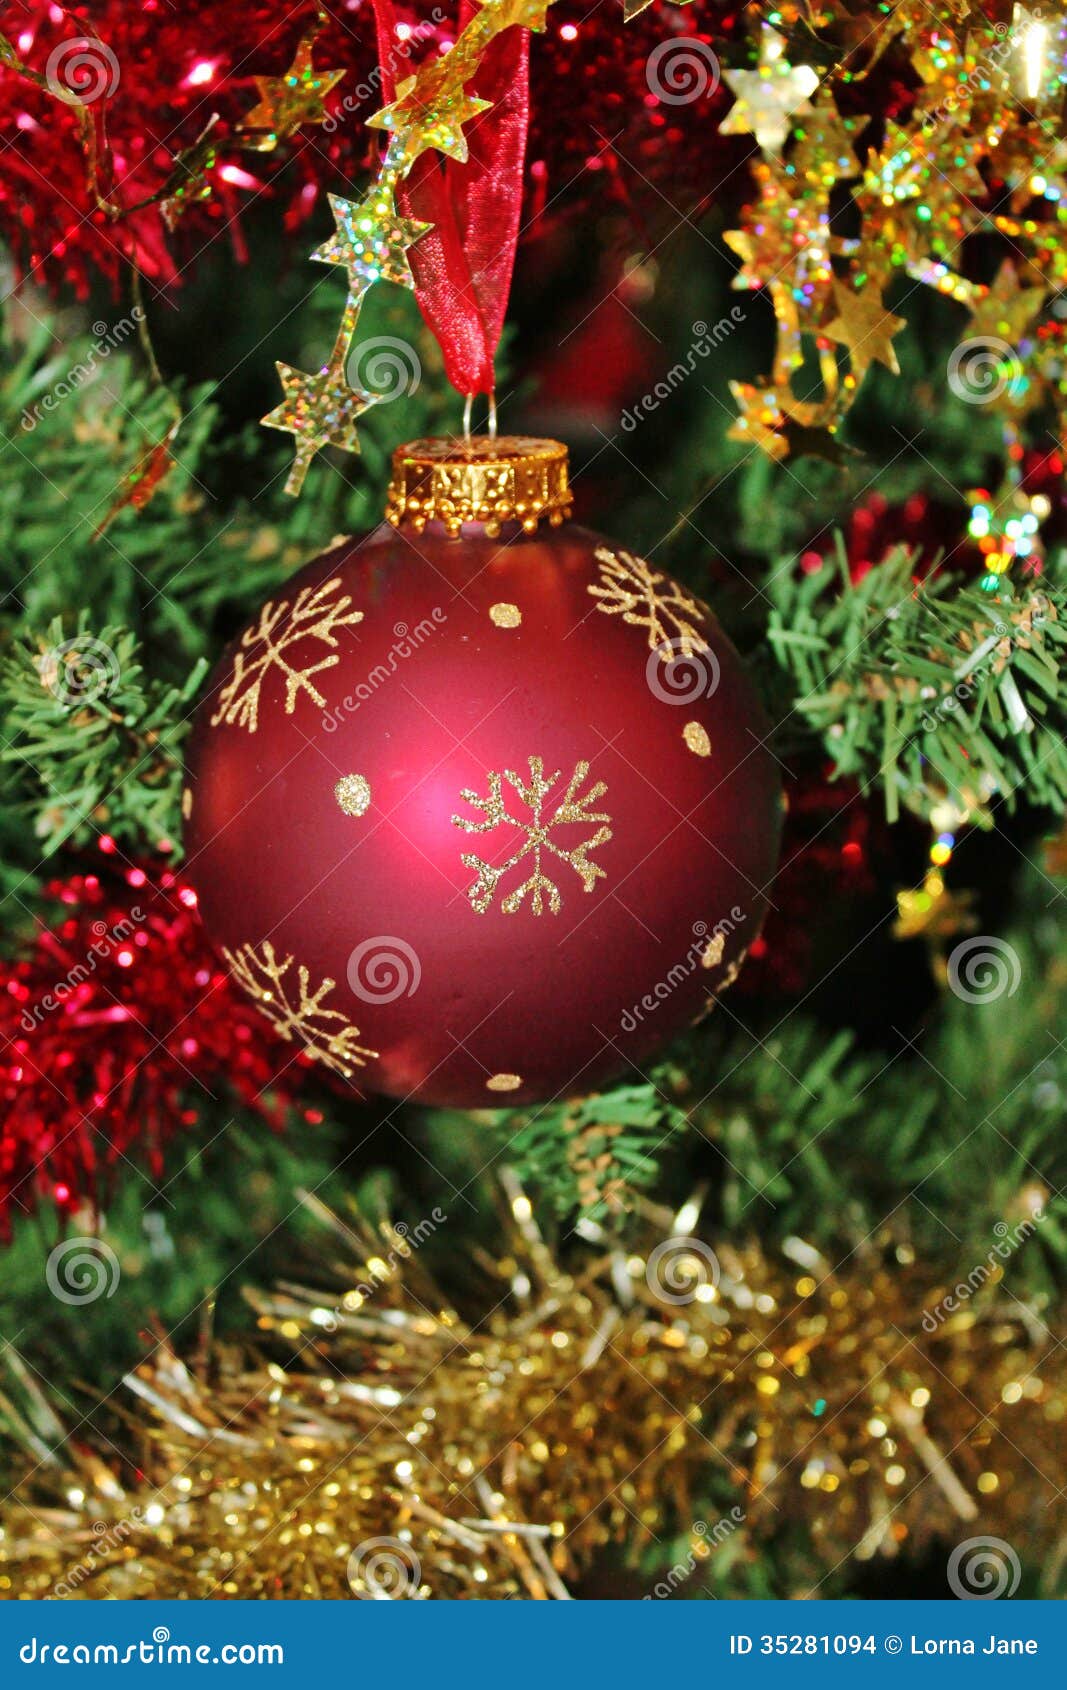 Christmas Decorations for Tree in Gold Glitter and Red Stock Photo ...